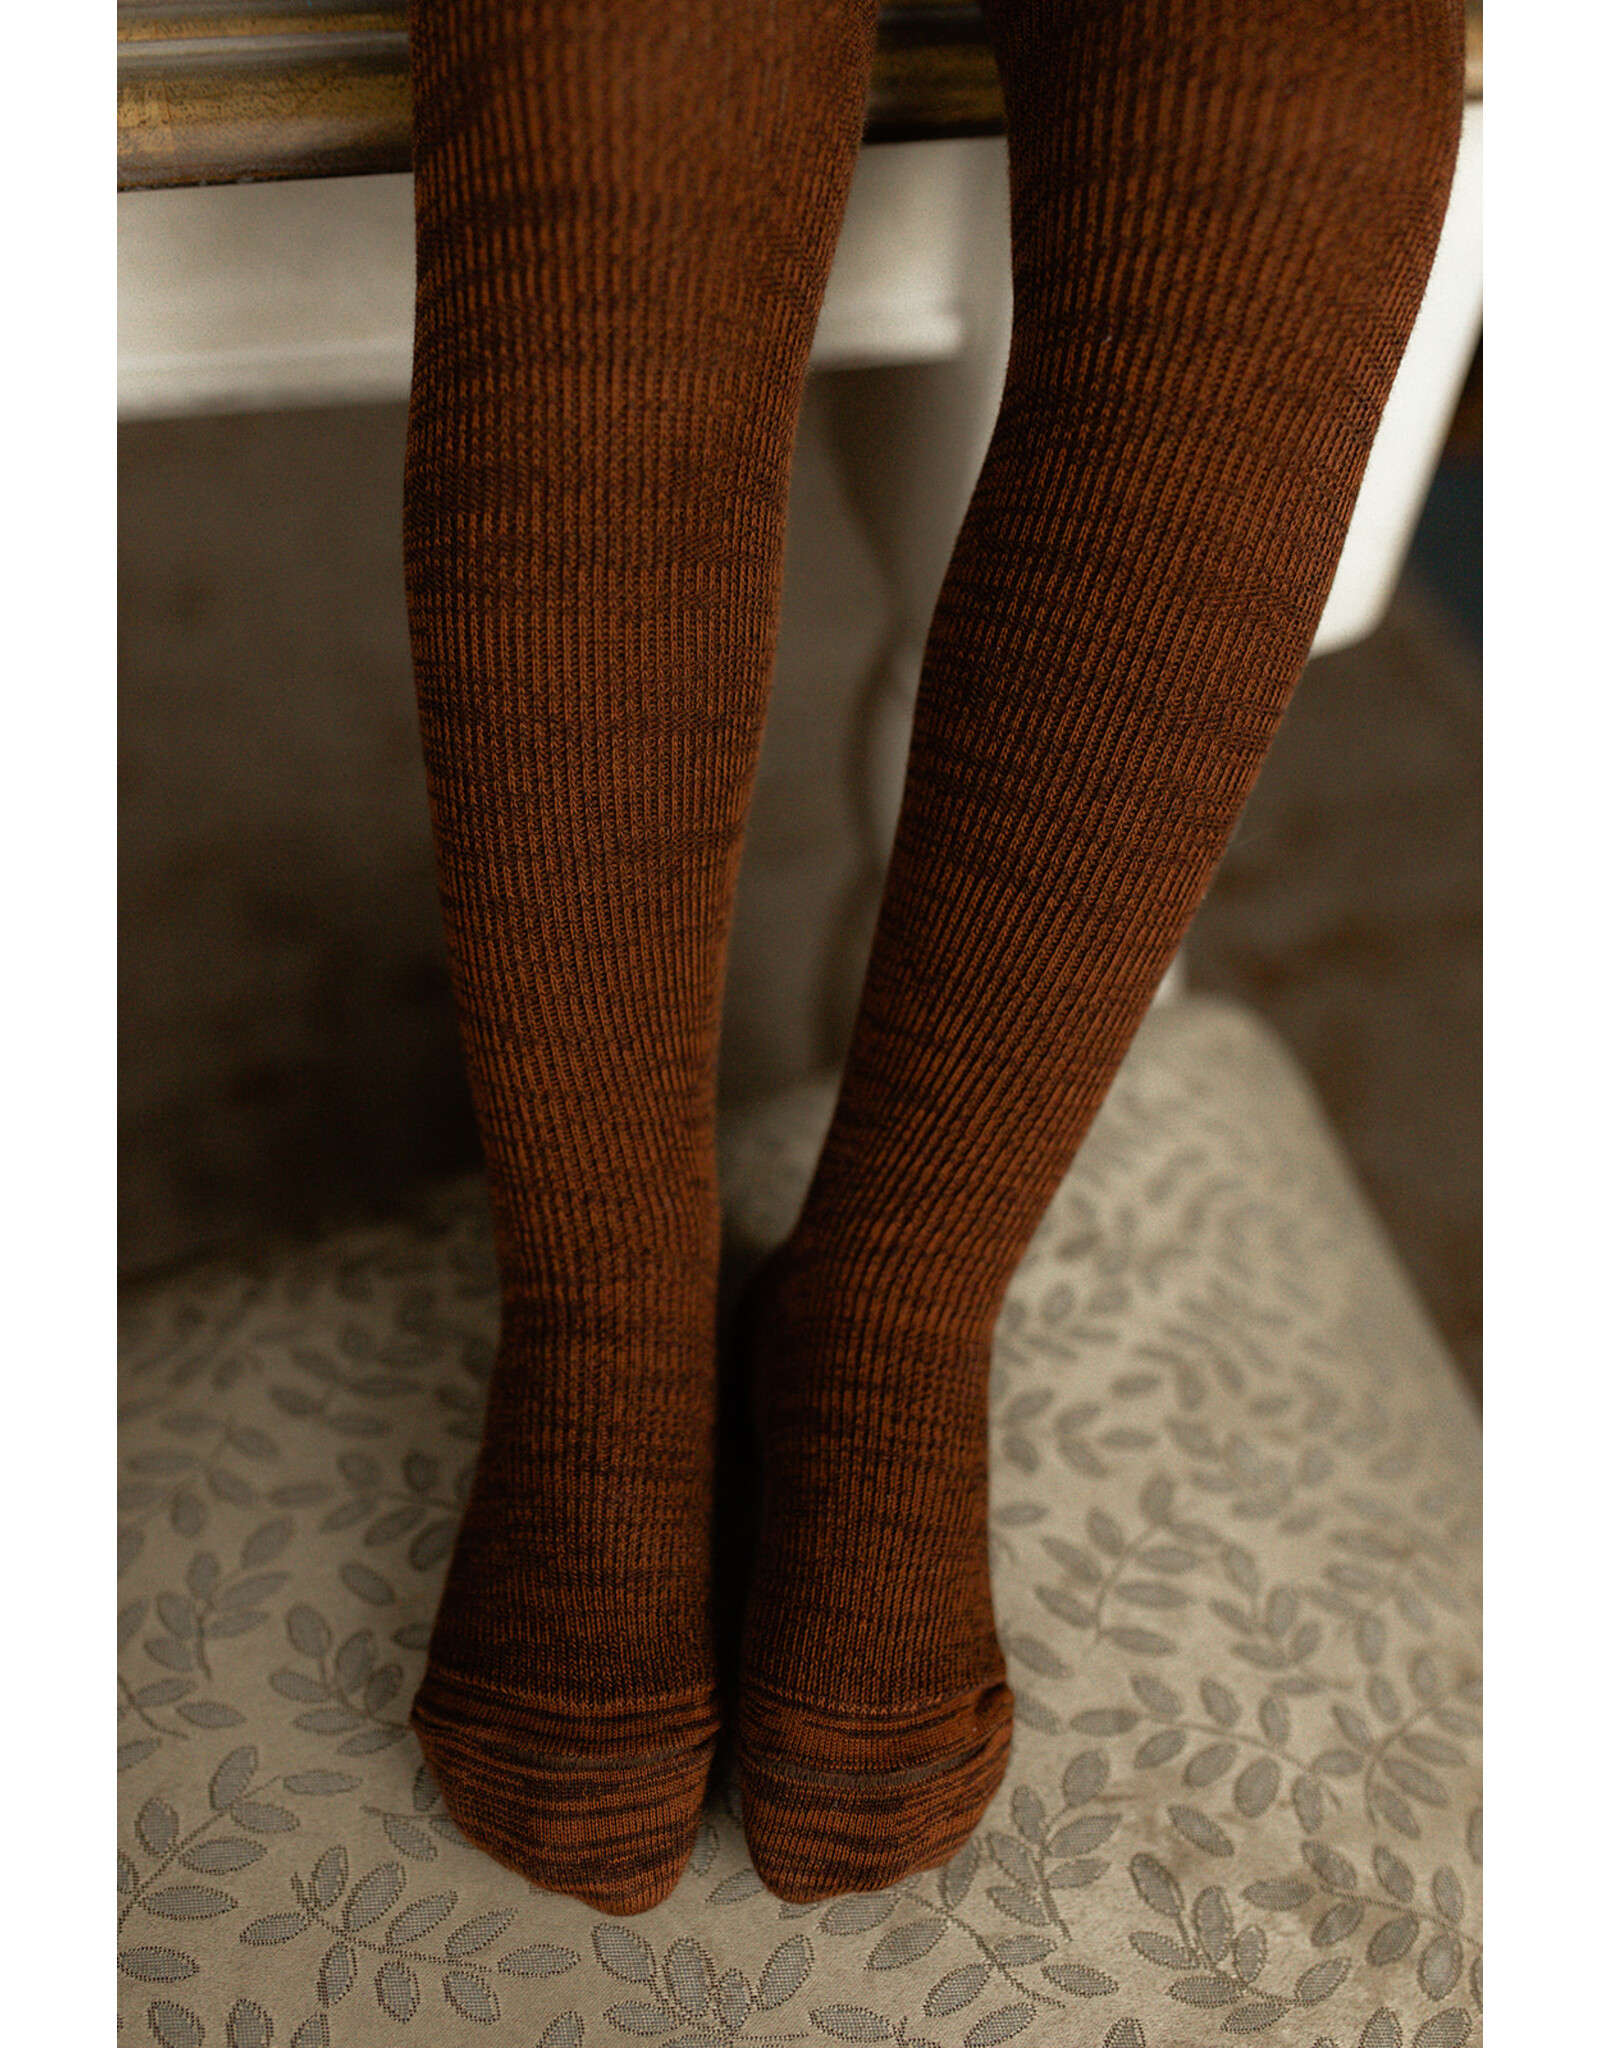 Silly Silas Footed Teddy Warmy Tights with Braces - Cinnamon